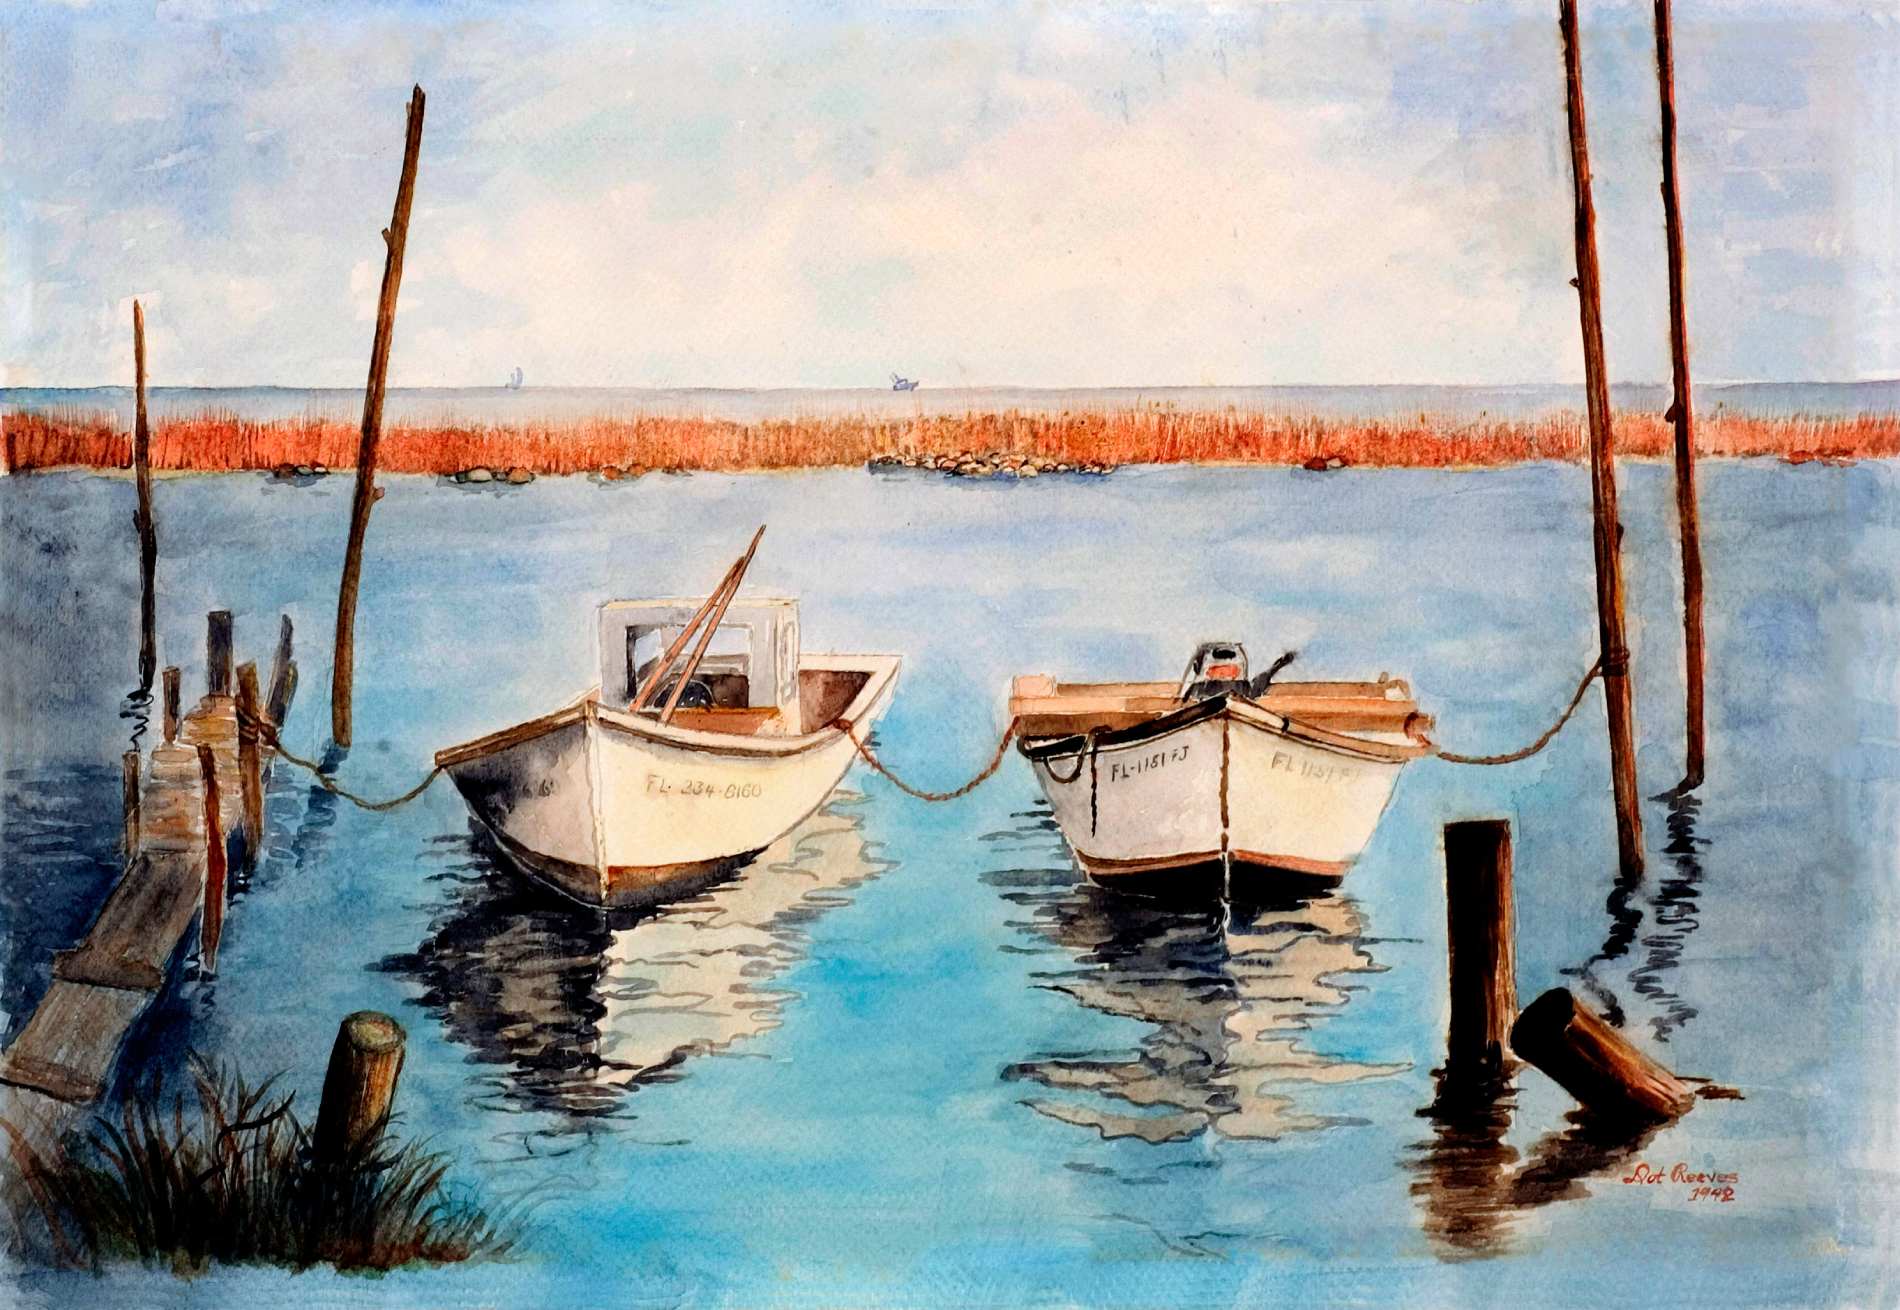 A Painting of Two Boats in Water